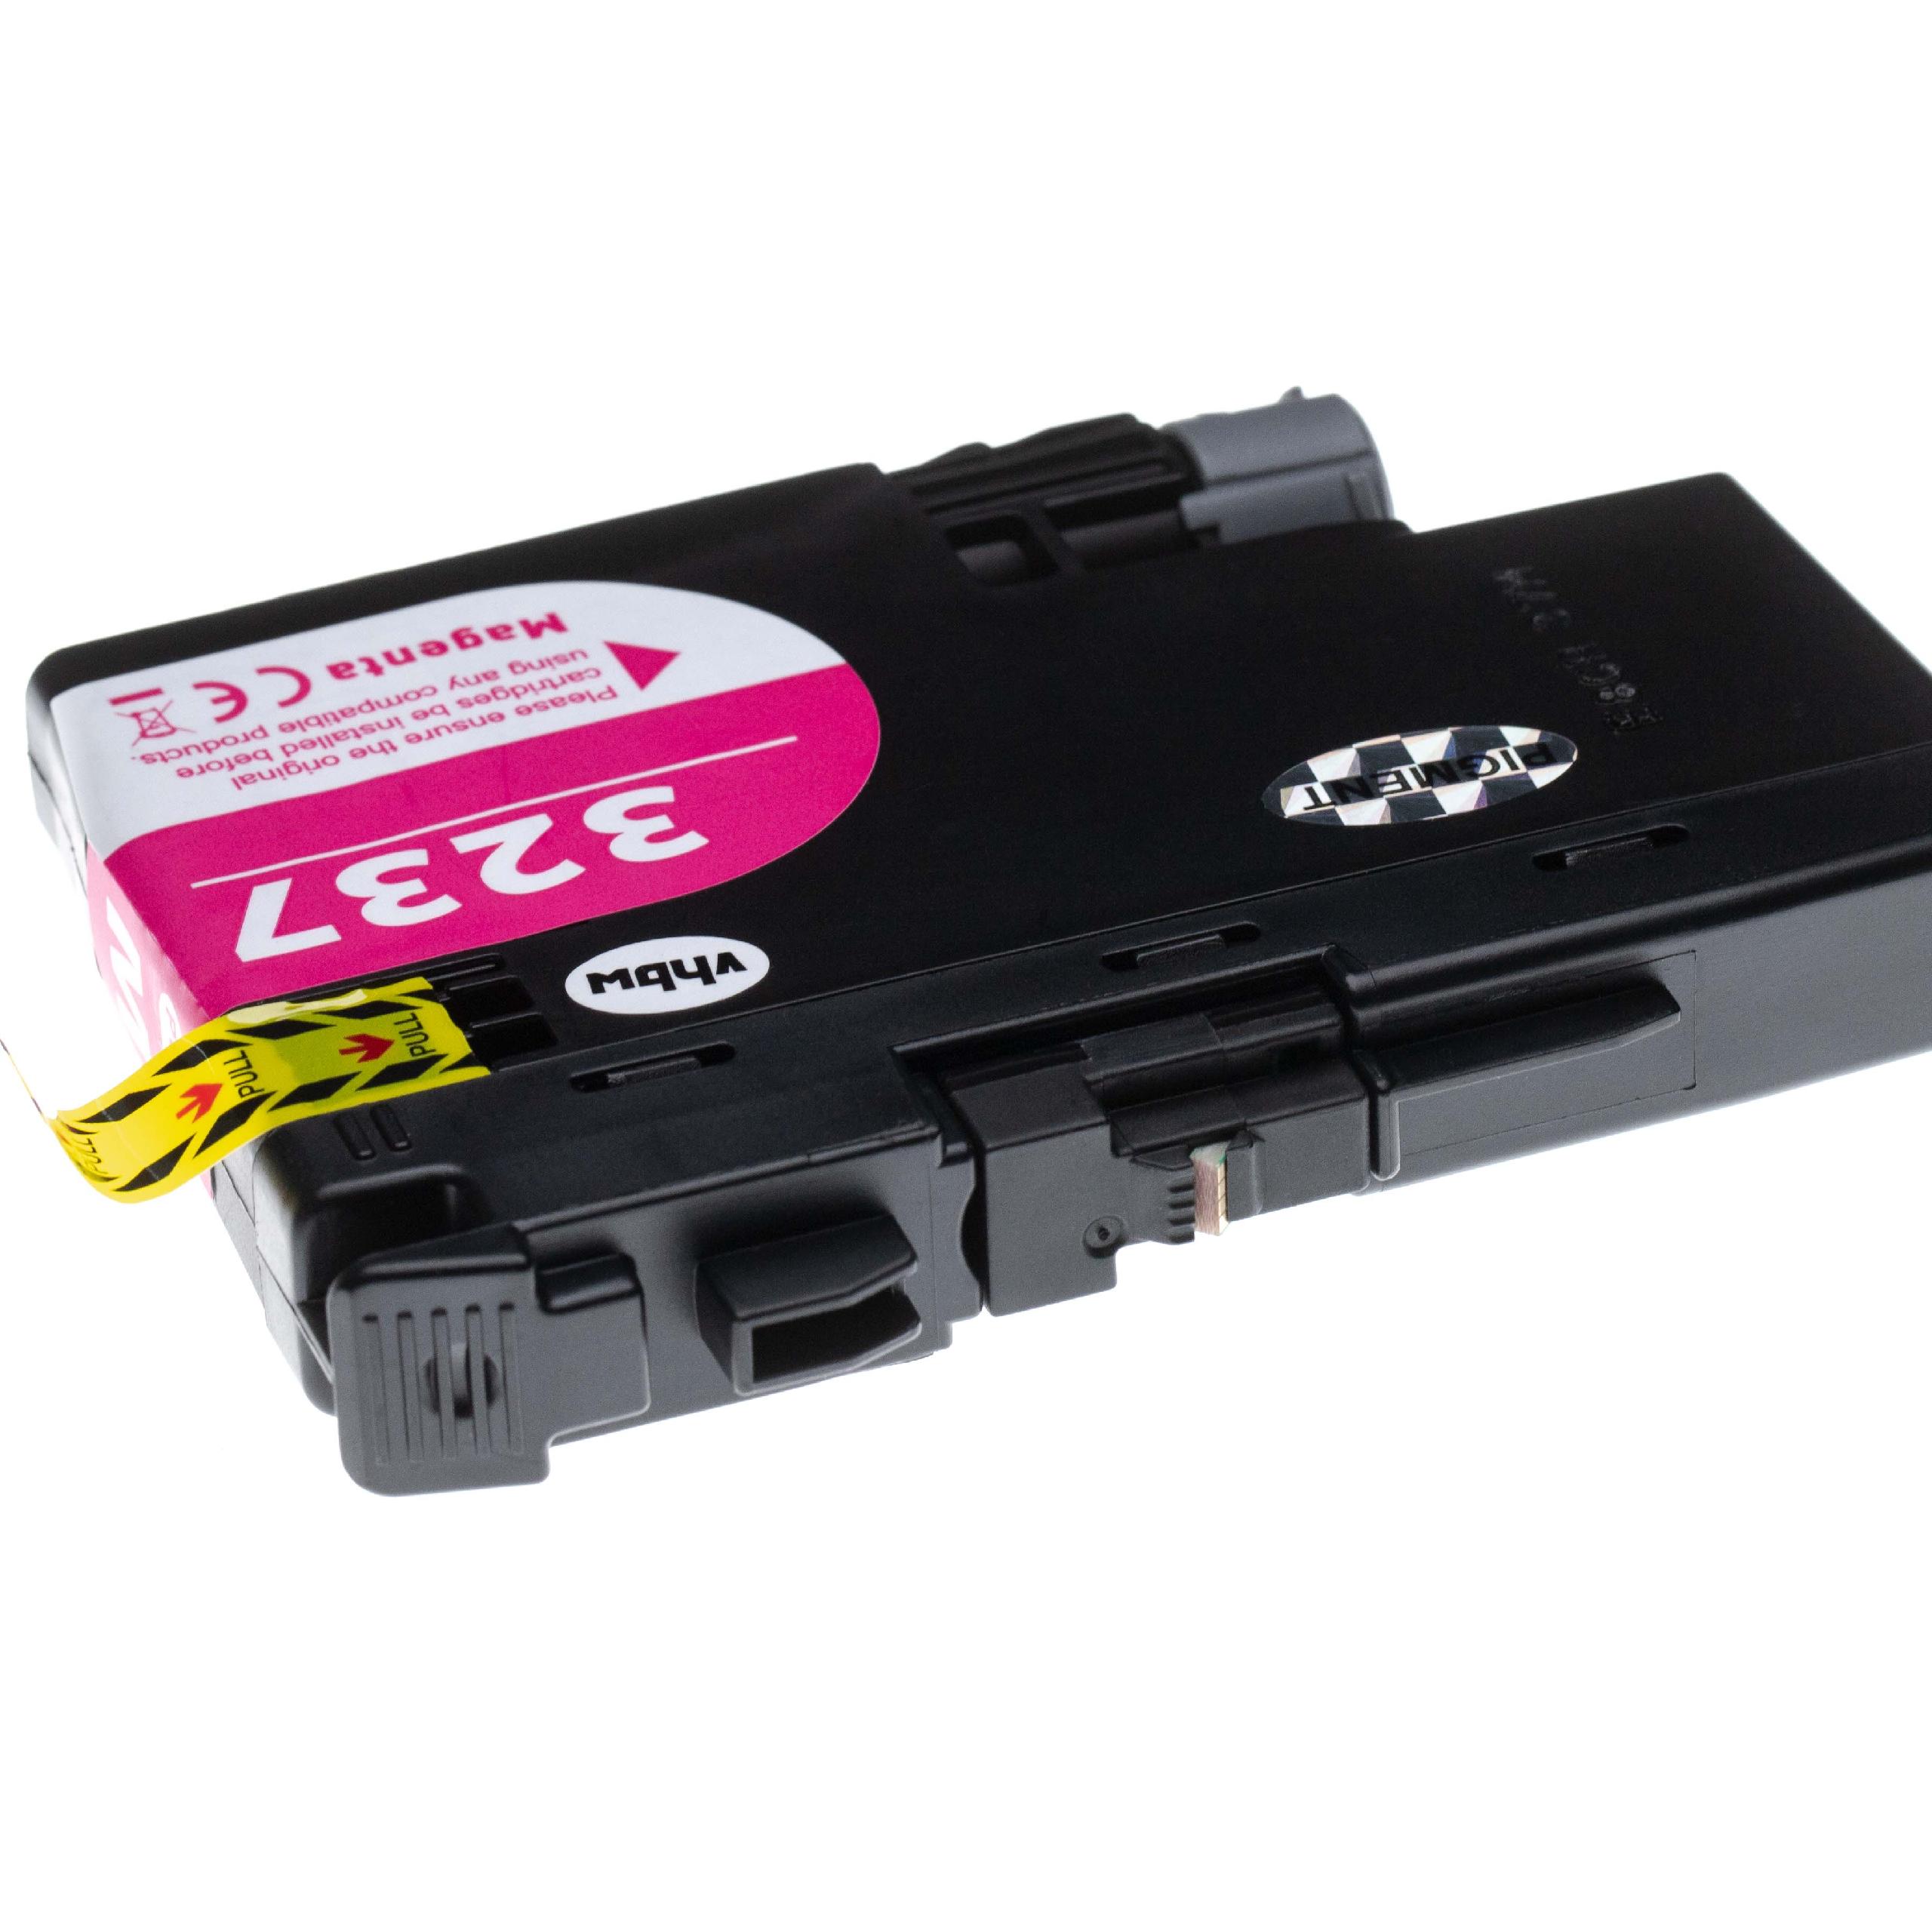 Ink Cartridge as Exchange for Brother LC-3237M, LC3237M for Brother Printer - Magenta 18.5 ml + Chip